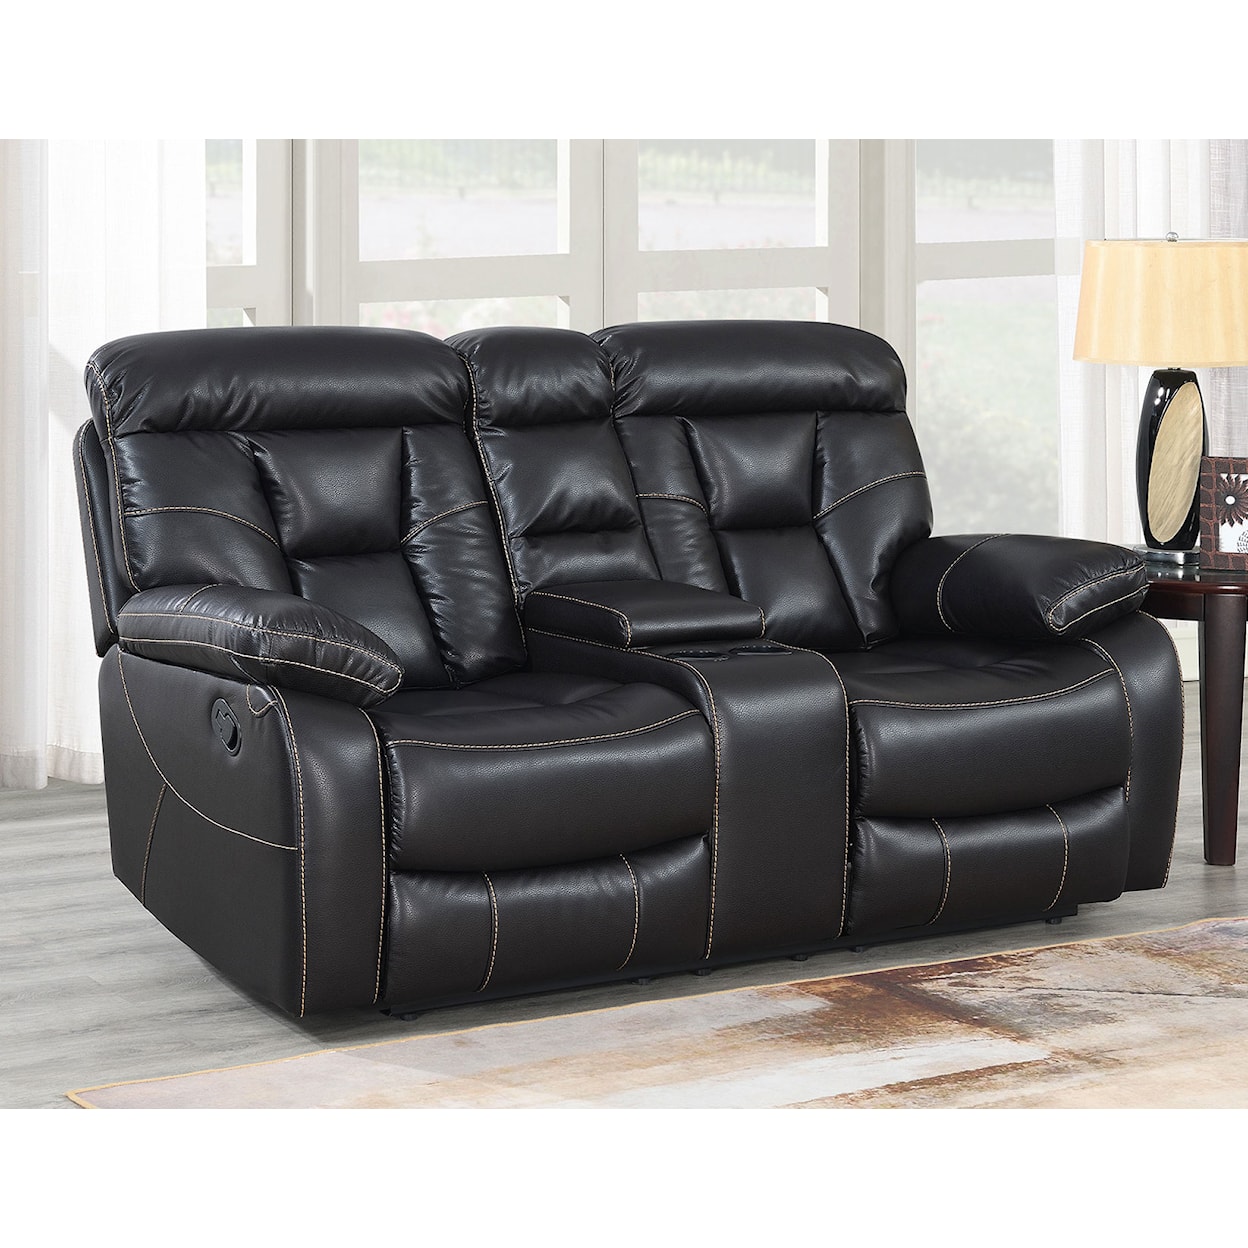 Steve Silver Squire Manual Reclining Loveseat